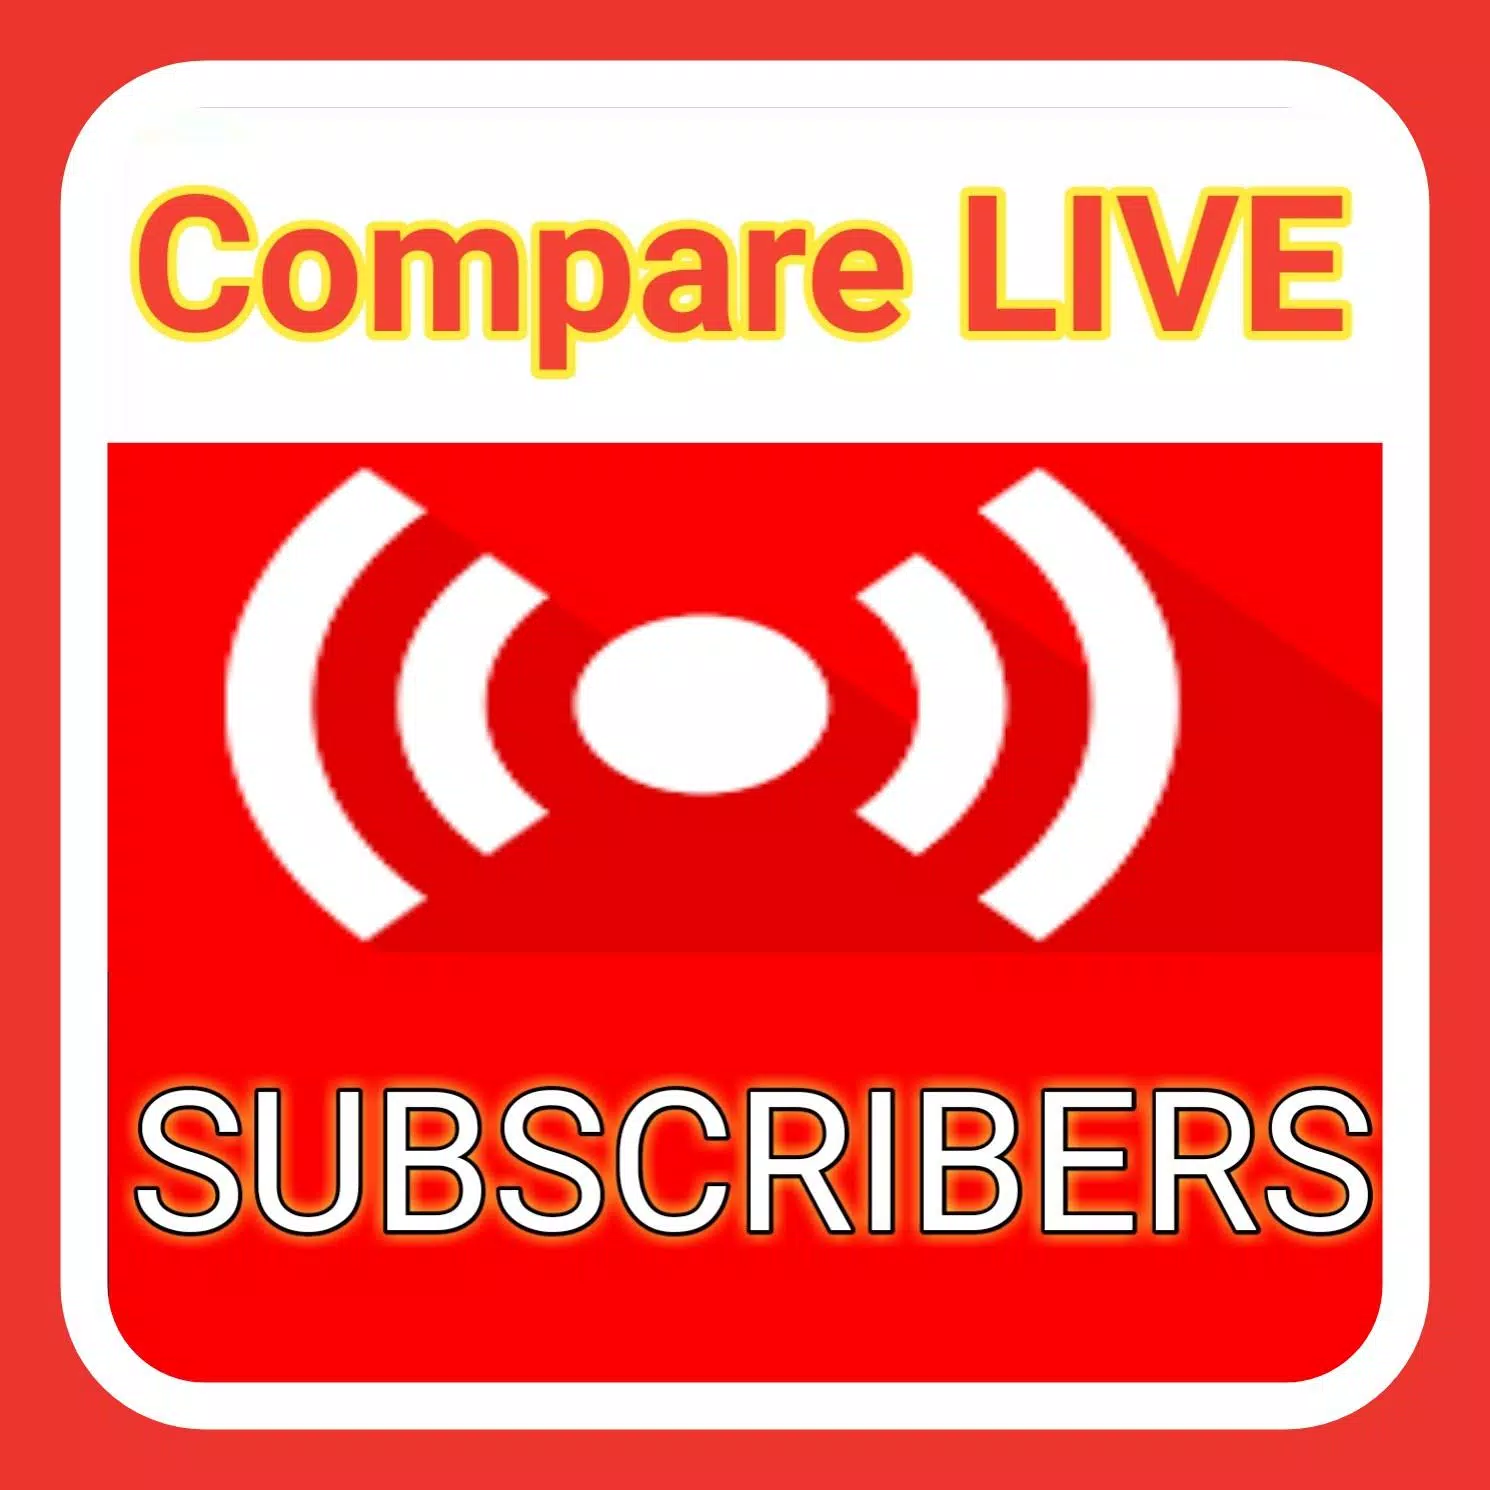 Live Subscriber count kaise kare